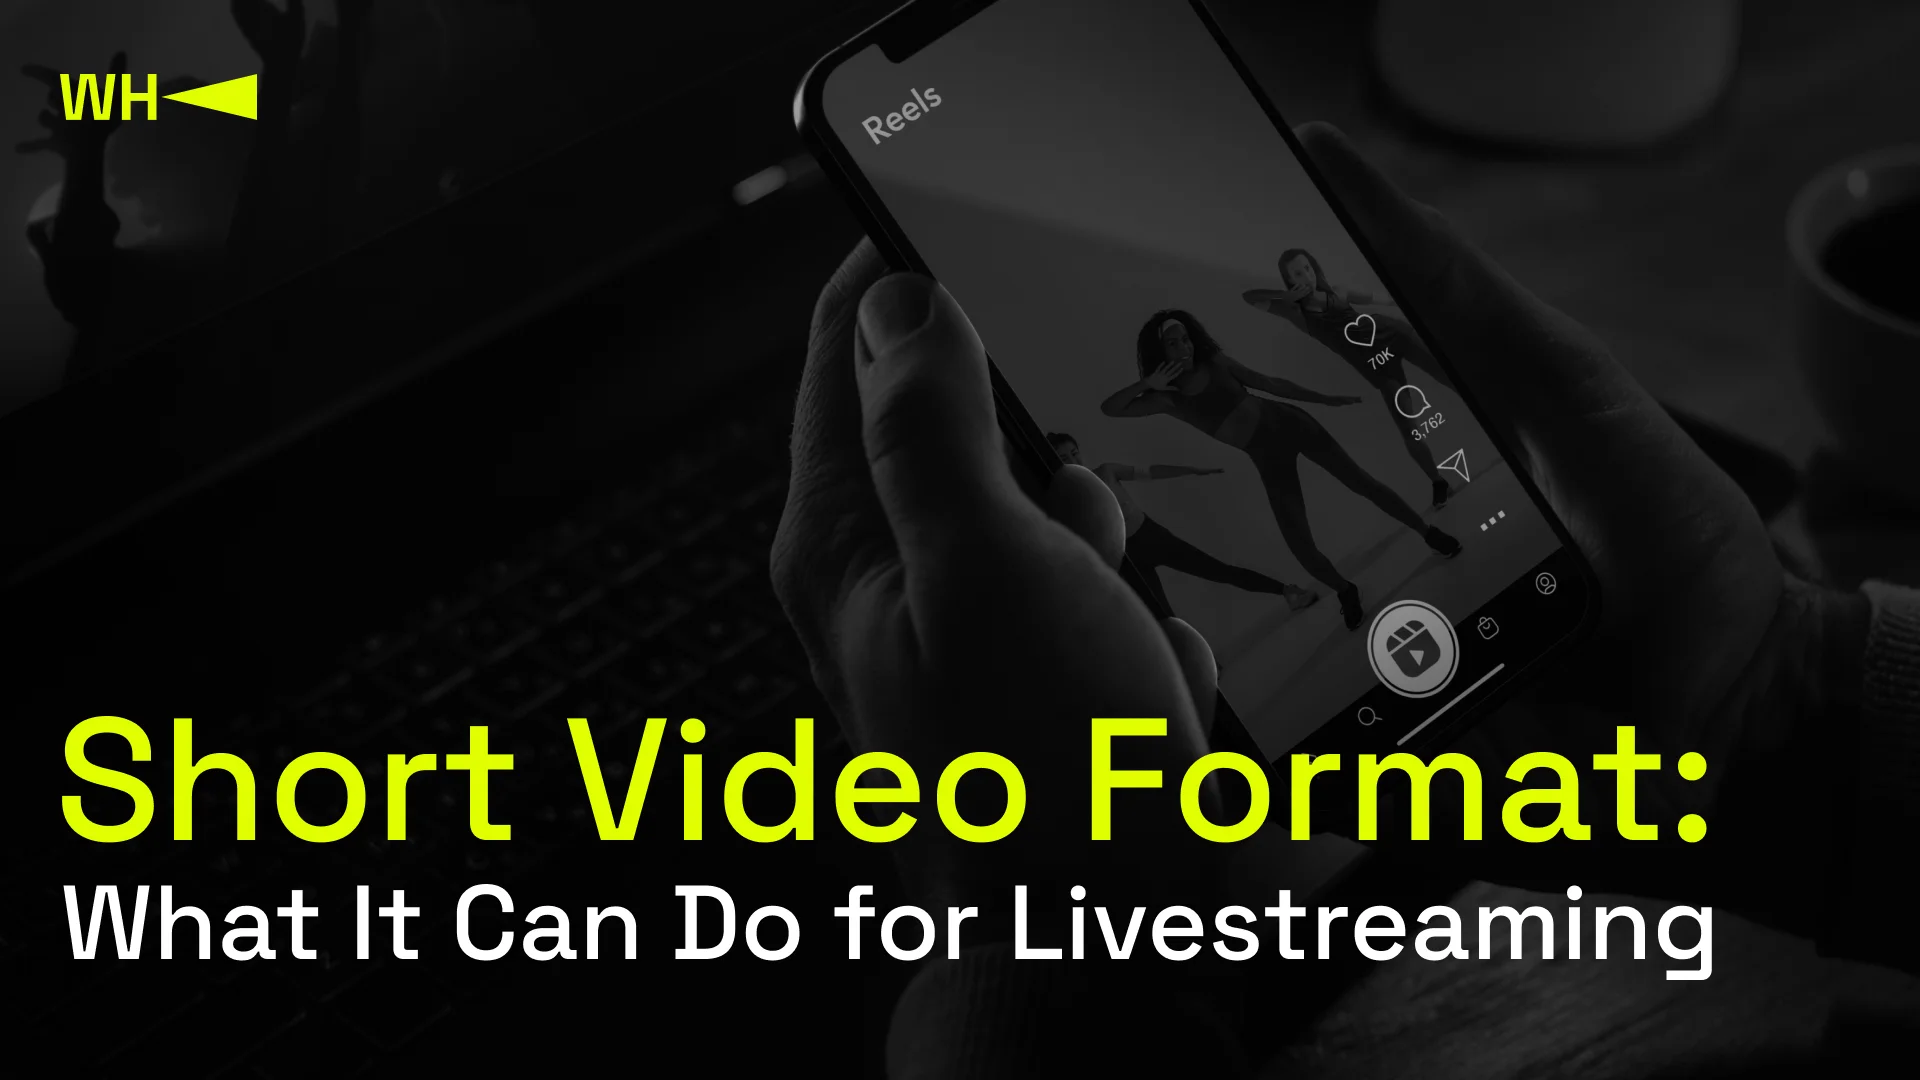 Short Video Format: What It Can Do for Livestreaming